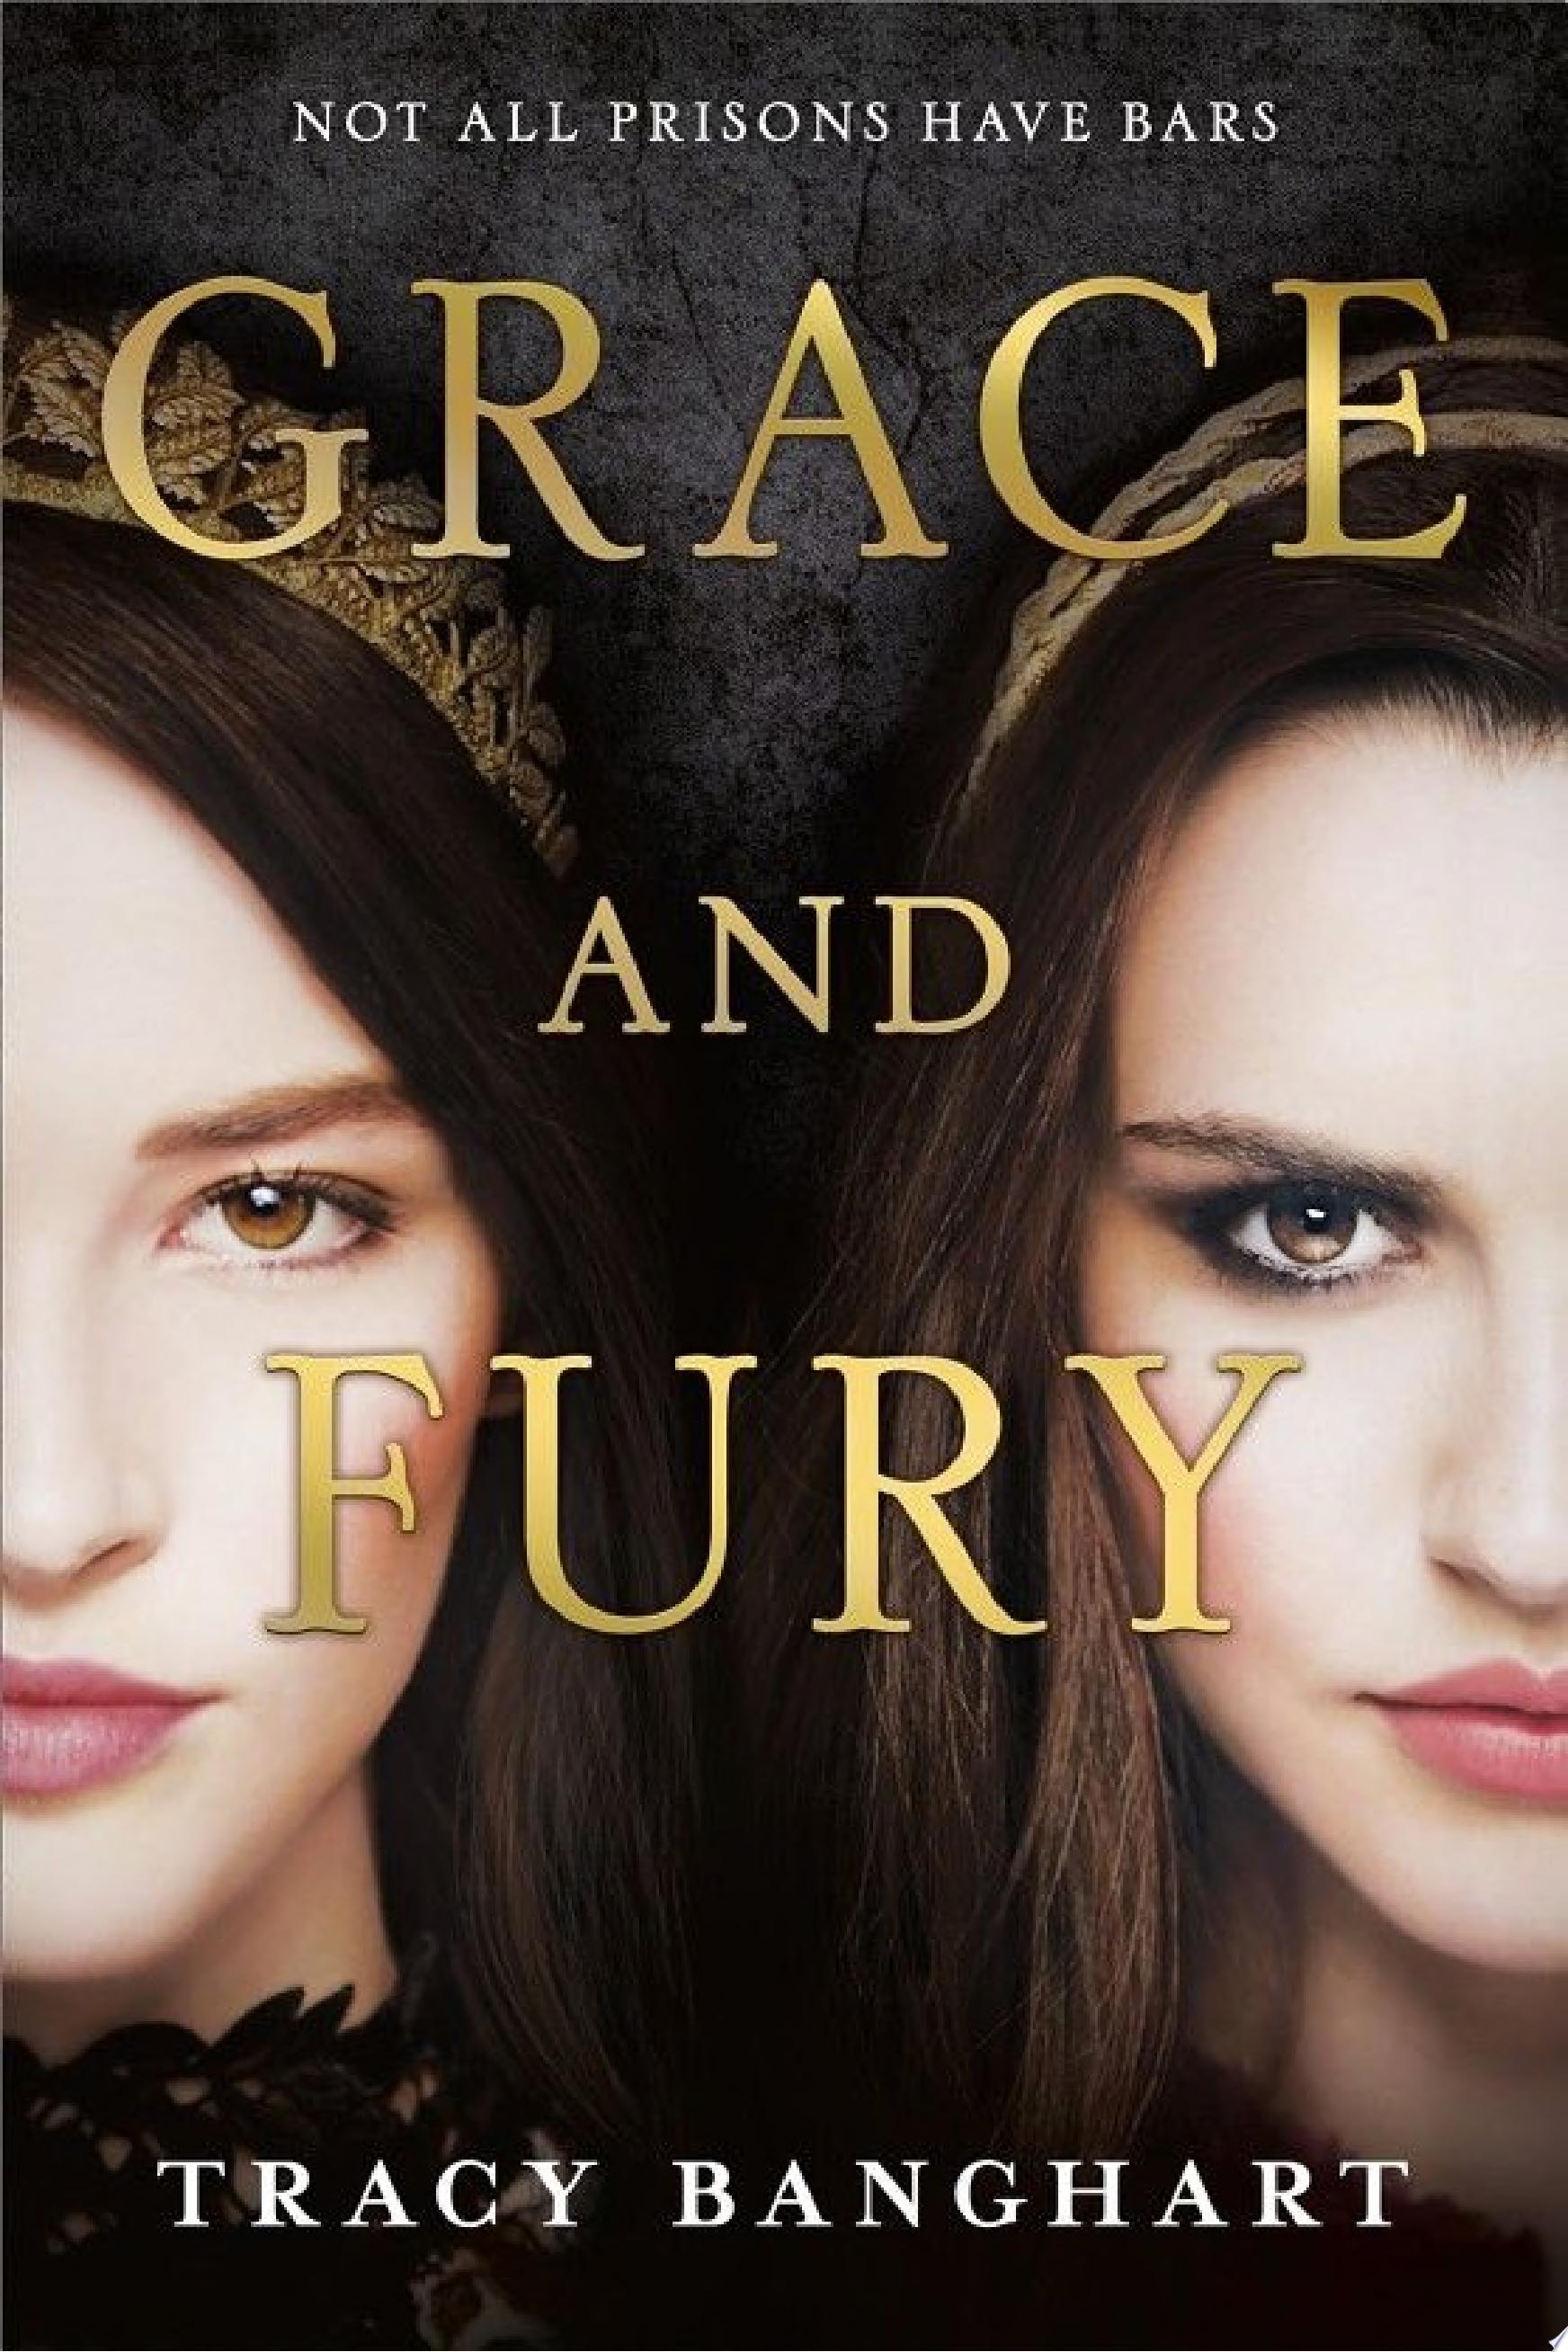 Image for "Grace and Fury"